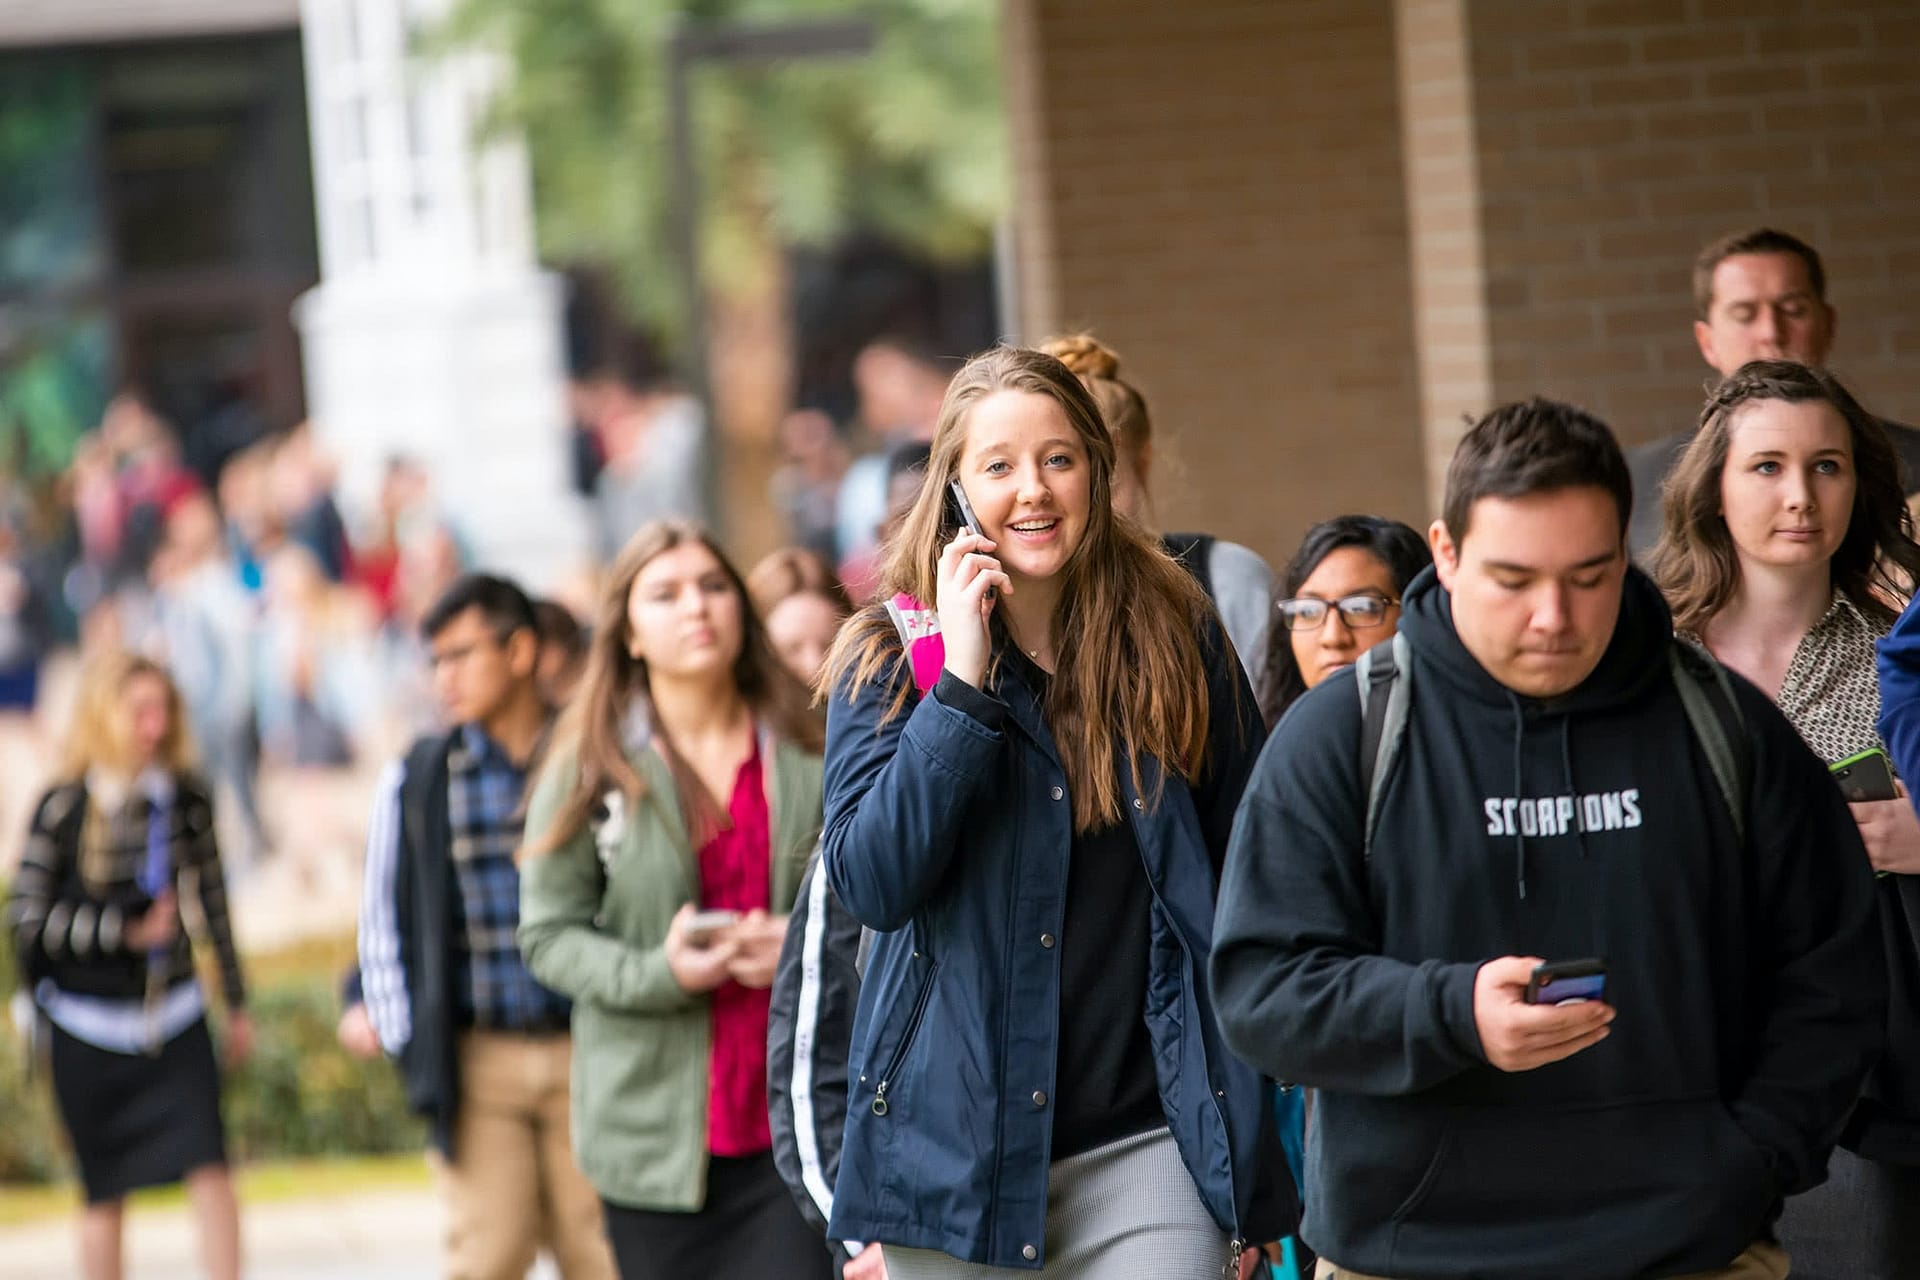 Female student talking on the phone and walking in a group of other students.